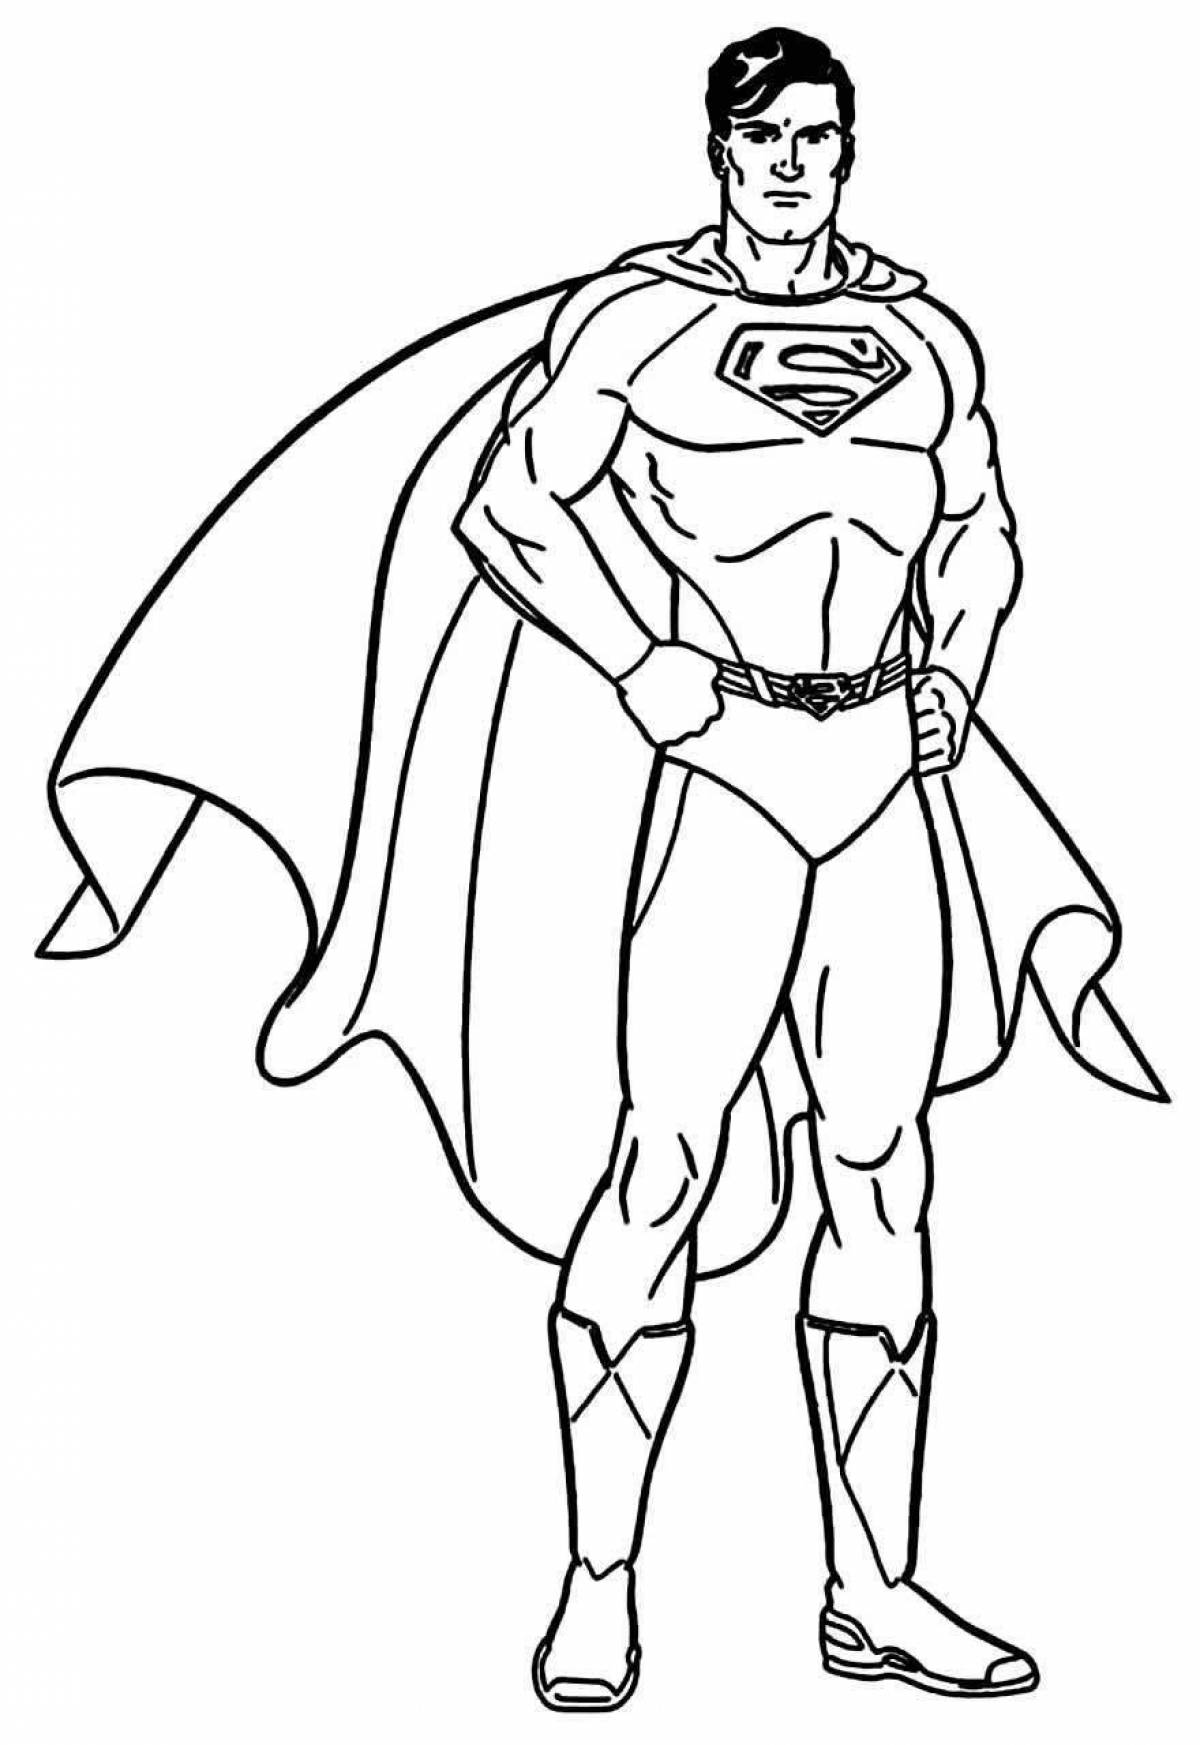 Amazing superman and batman coloring pages